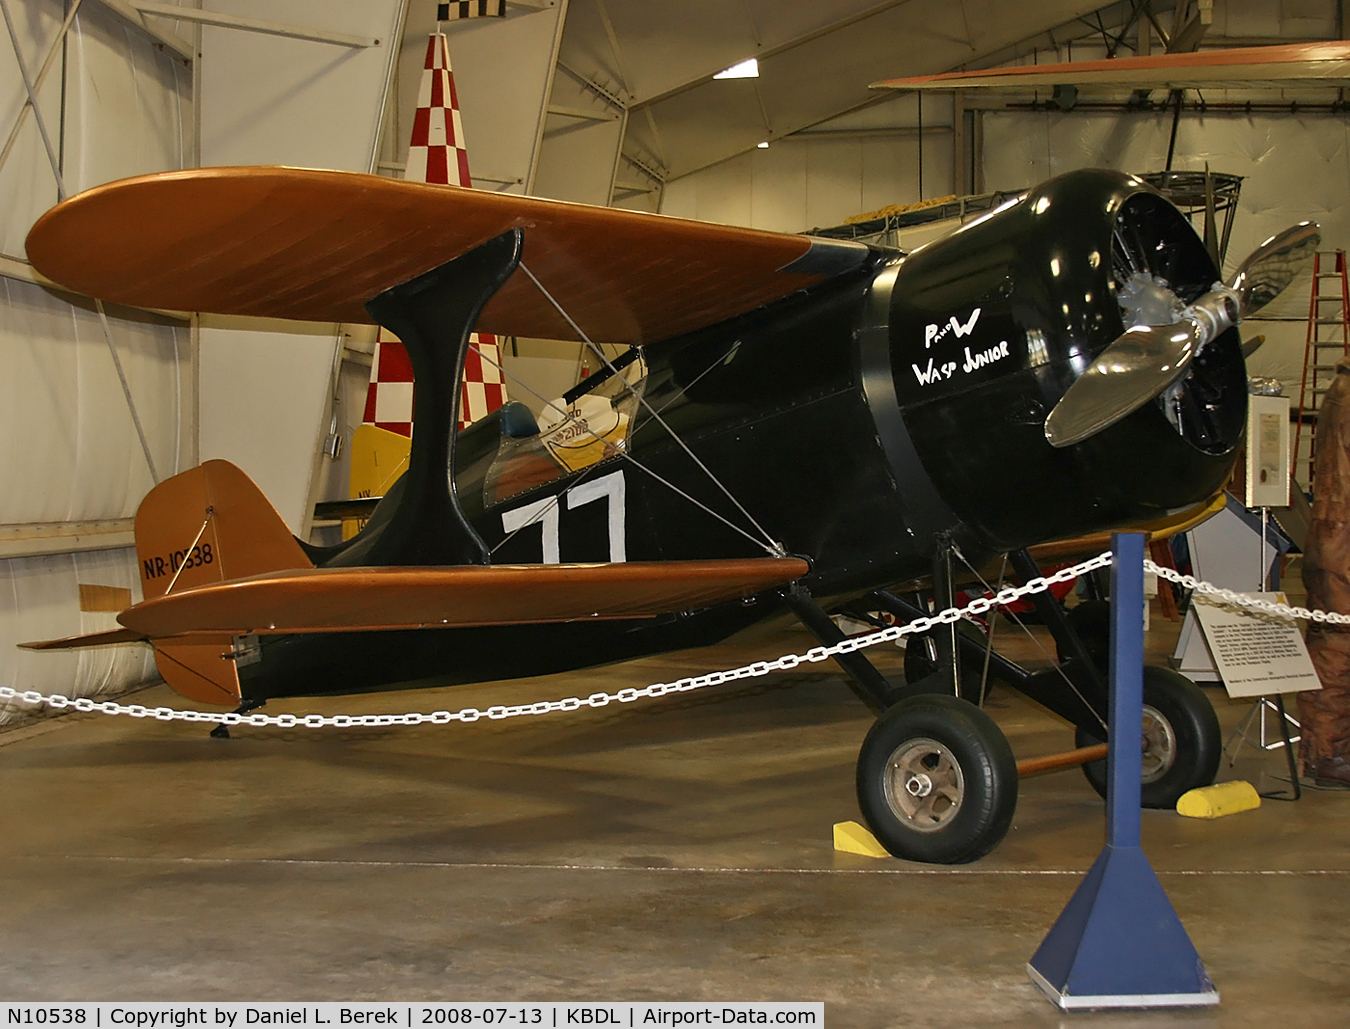 N10538, 1930 Laird LC-RW300 C/N 192, This classic Golden Age racer can now be admired at the New England Air Museum.